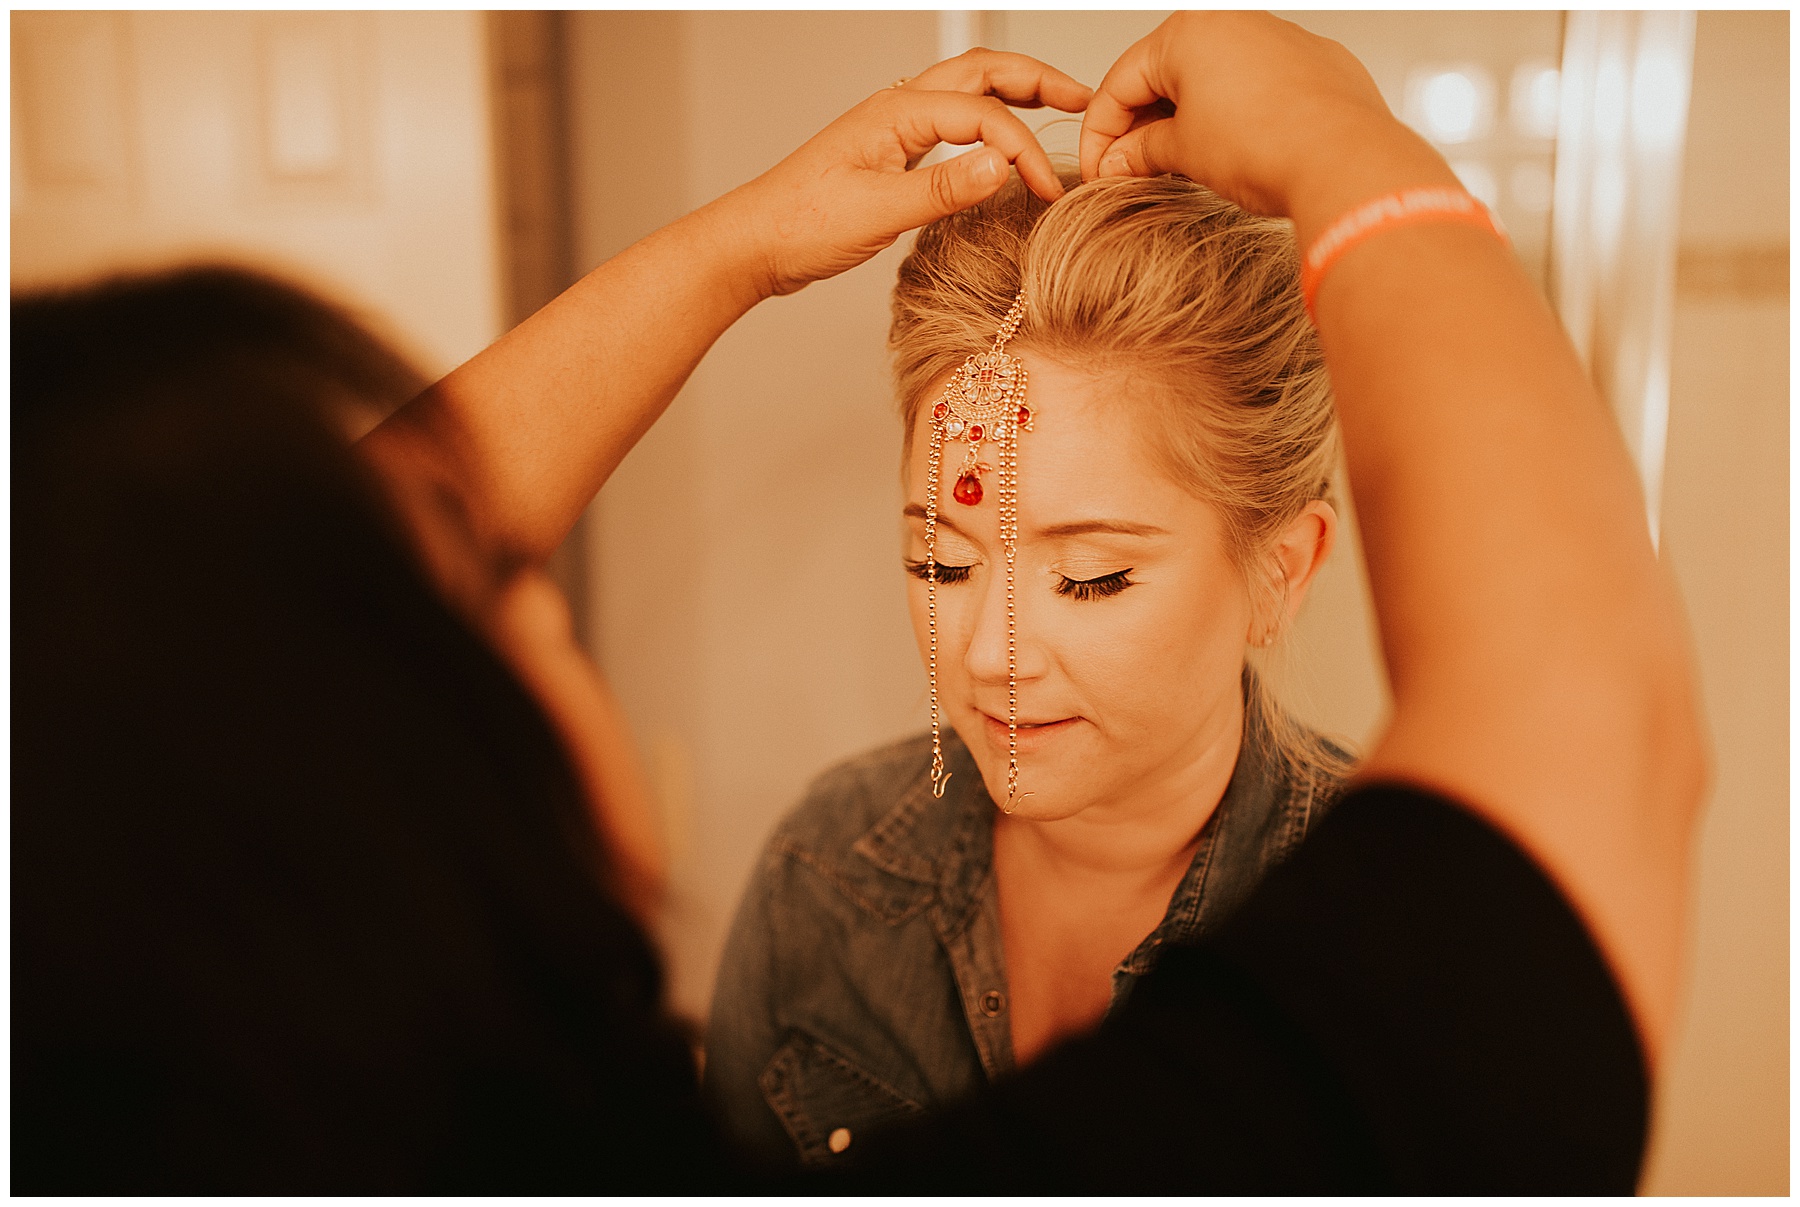 Bride getting ready for her religious Indian ceremony | Juju Photography - Florida, San Francisco & Destination wedding photographer 